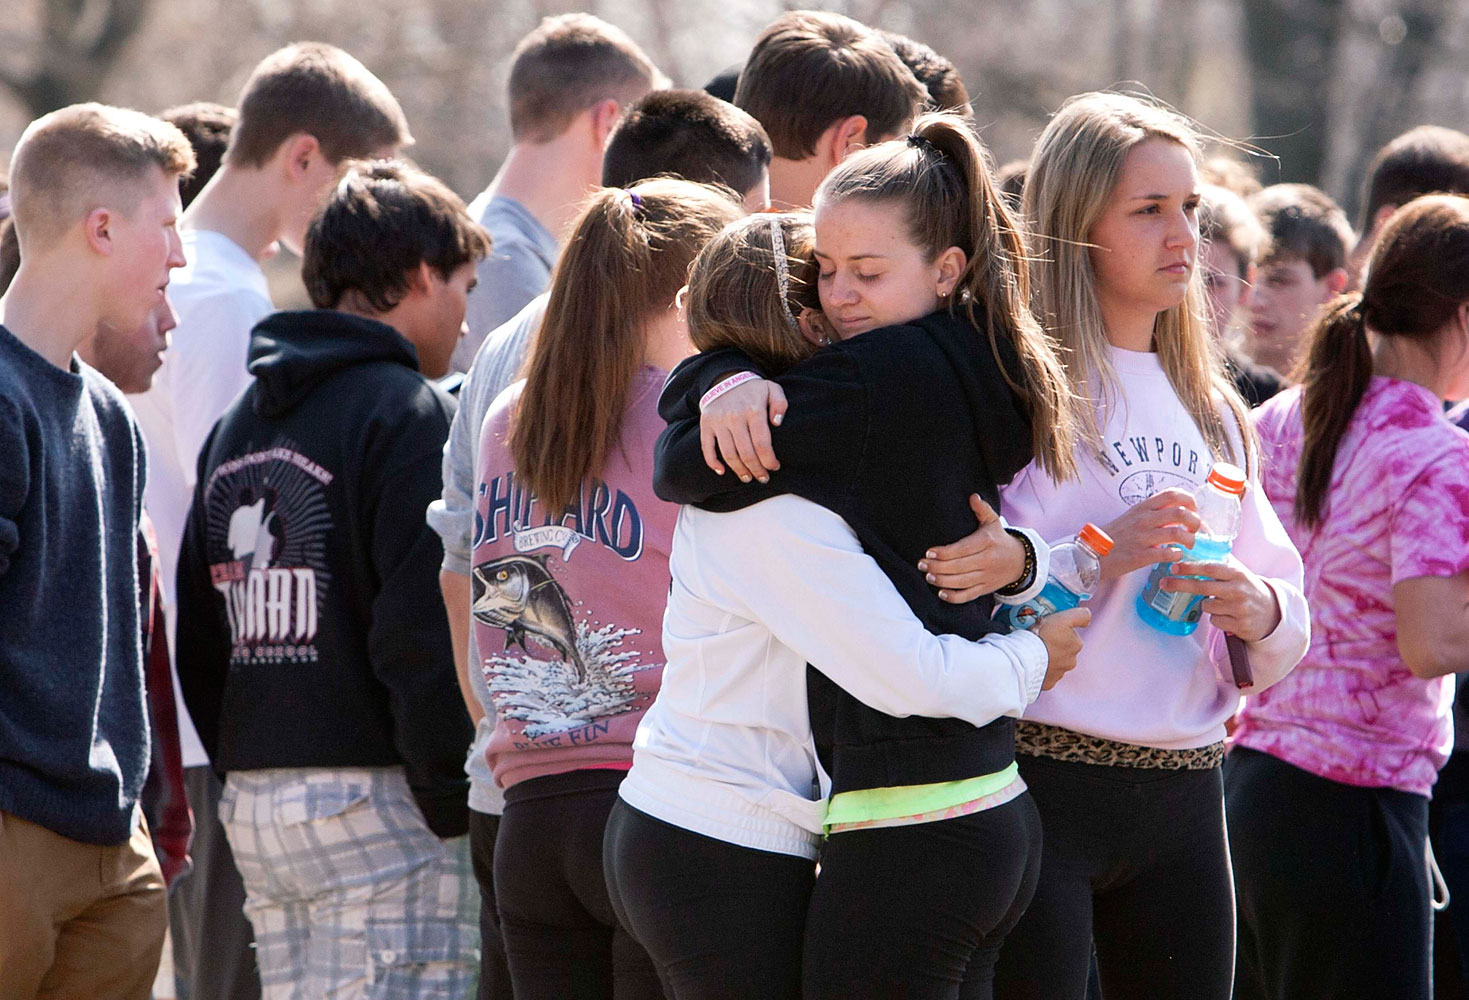 Students mourn in front of Jonathan Law High School in Milford